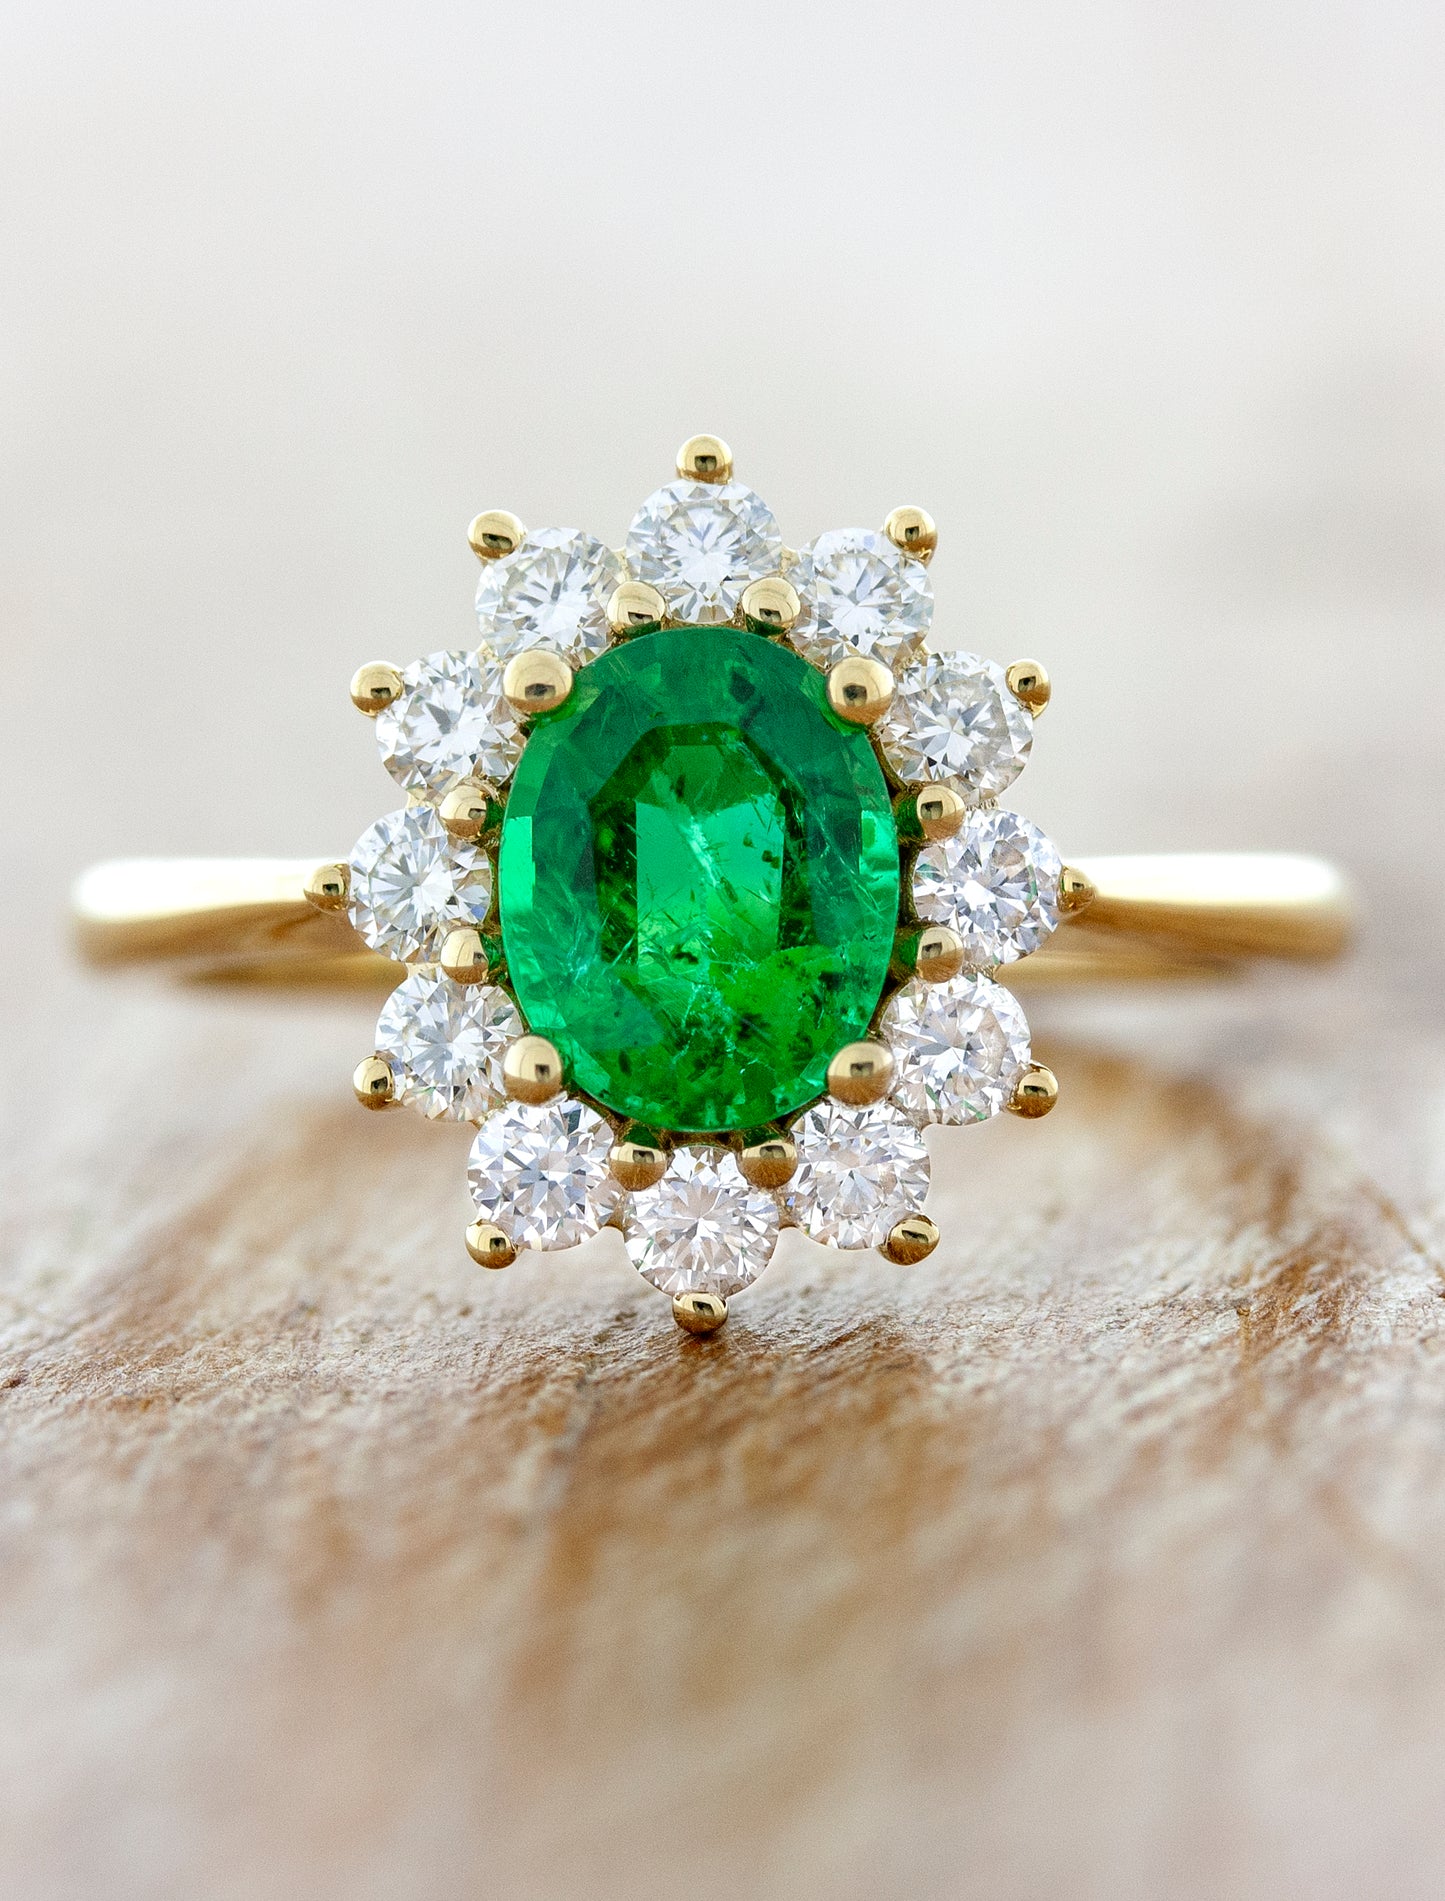 caption:Shown in 14k yellow gold option with green emerald center stone